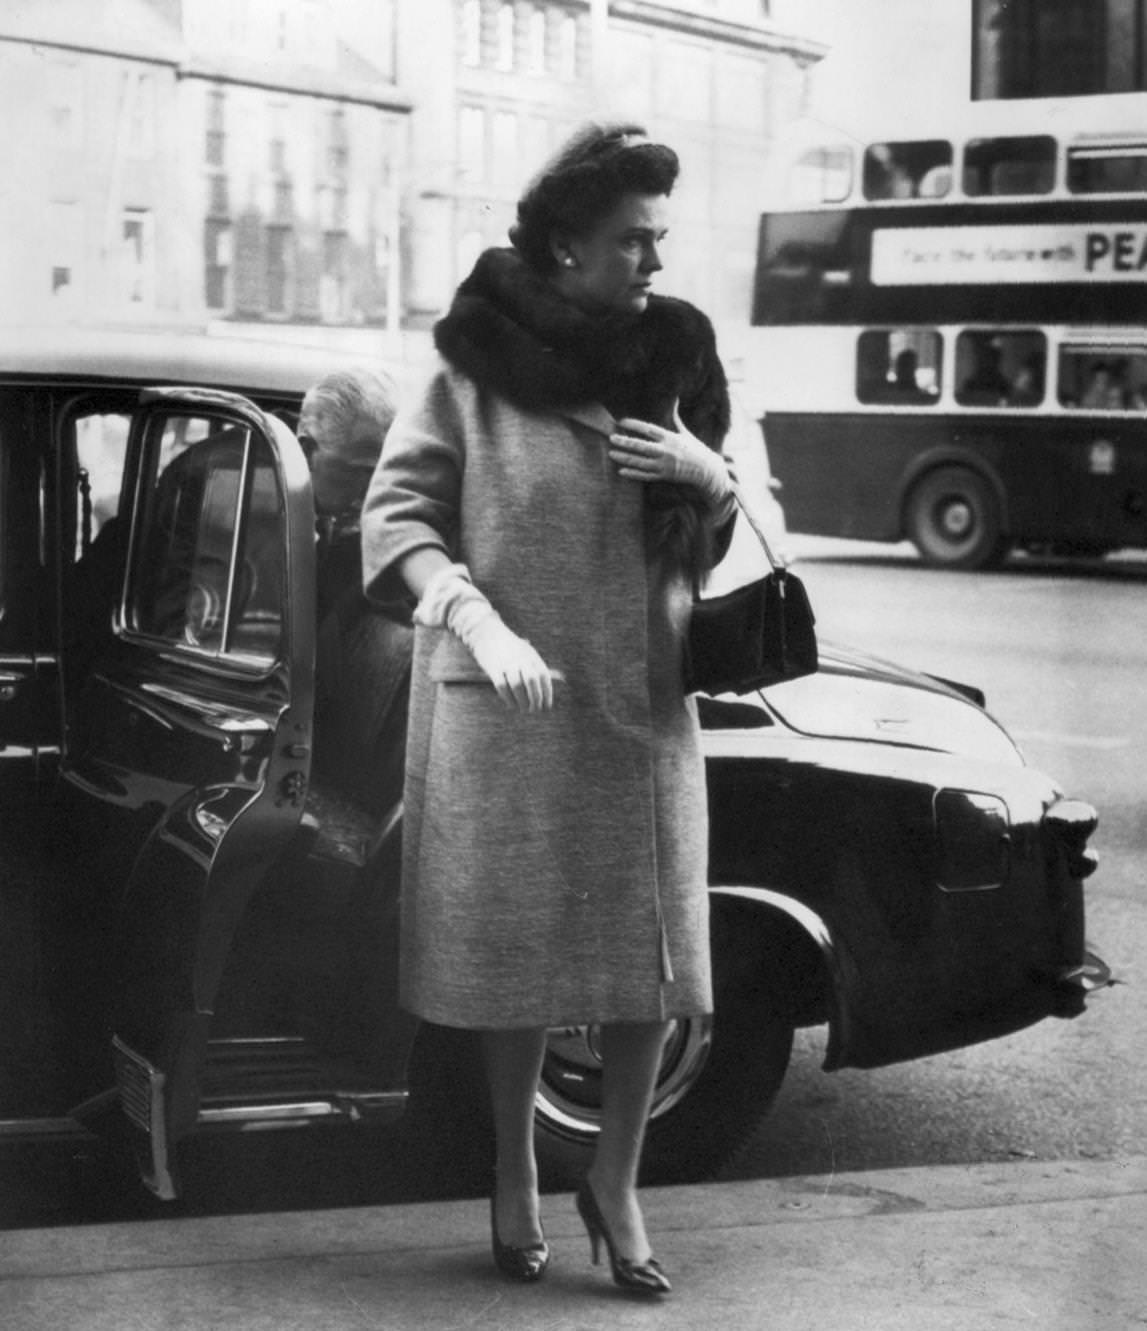 Margaret Sweeny, the Duchess of Argyll (1912 - 1993) arriving at court during her divorce hearing in Edinburgh, 1963